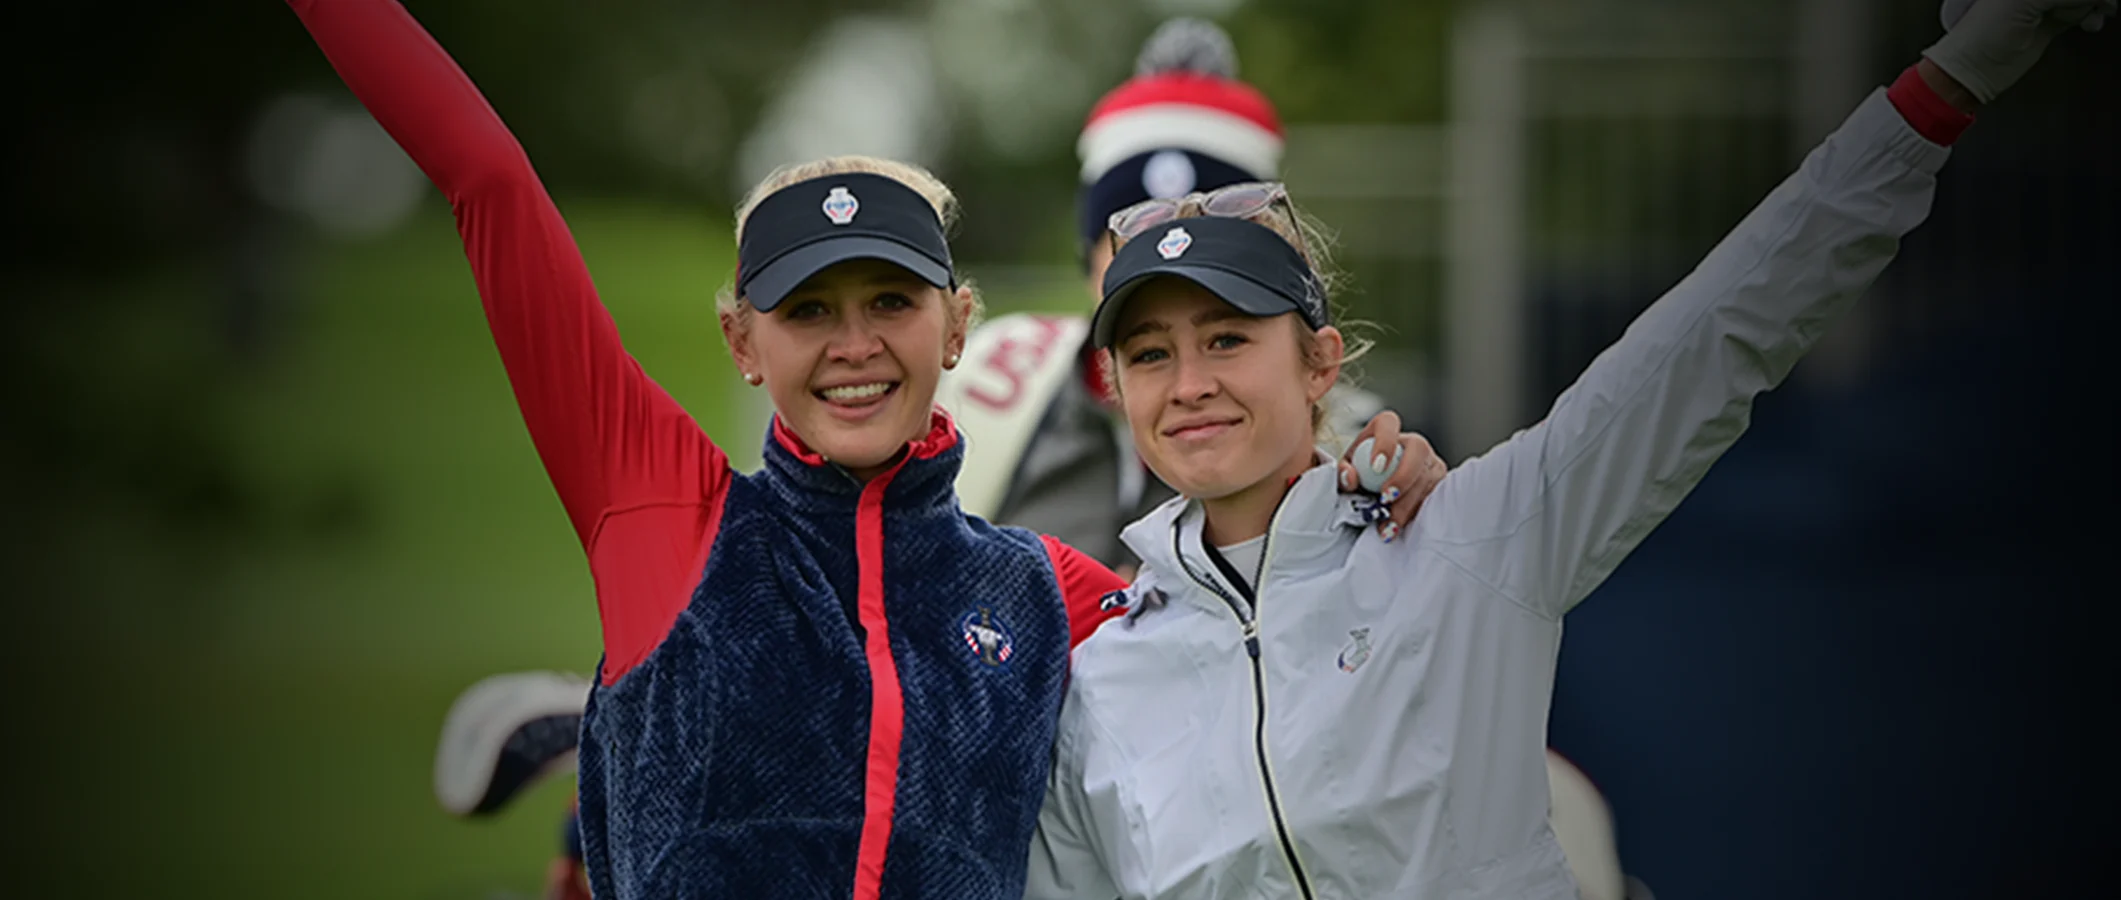 Podcast No. 85: Jessica and Nelly Korda, Top-Ranked Pro Golfers